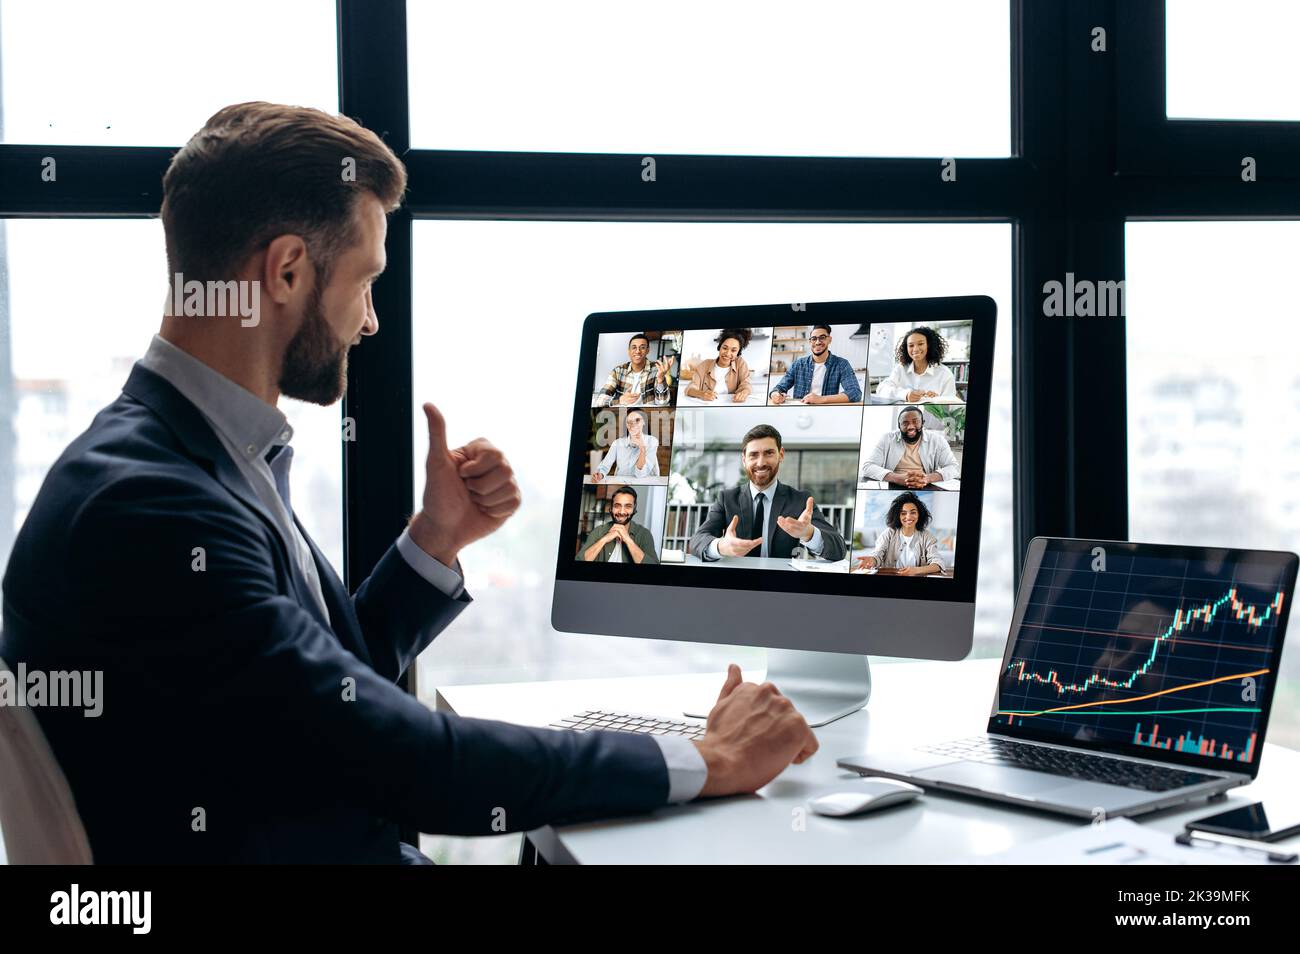 Online video conference. Successful business man, company boss, stock investor, conducts financial brainstorm with group of multiracial partners by video call, discuss investments in the stock market Stock Photo